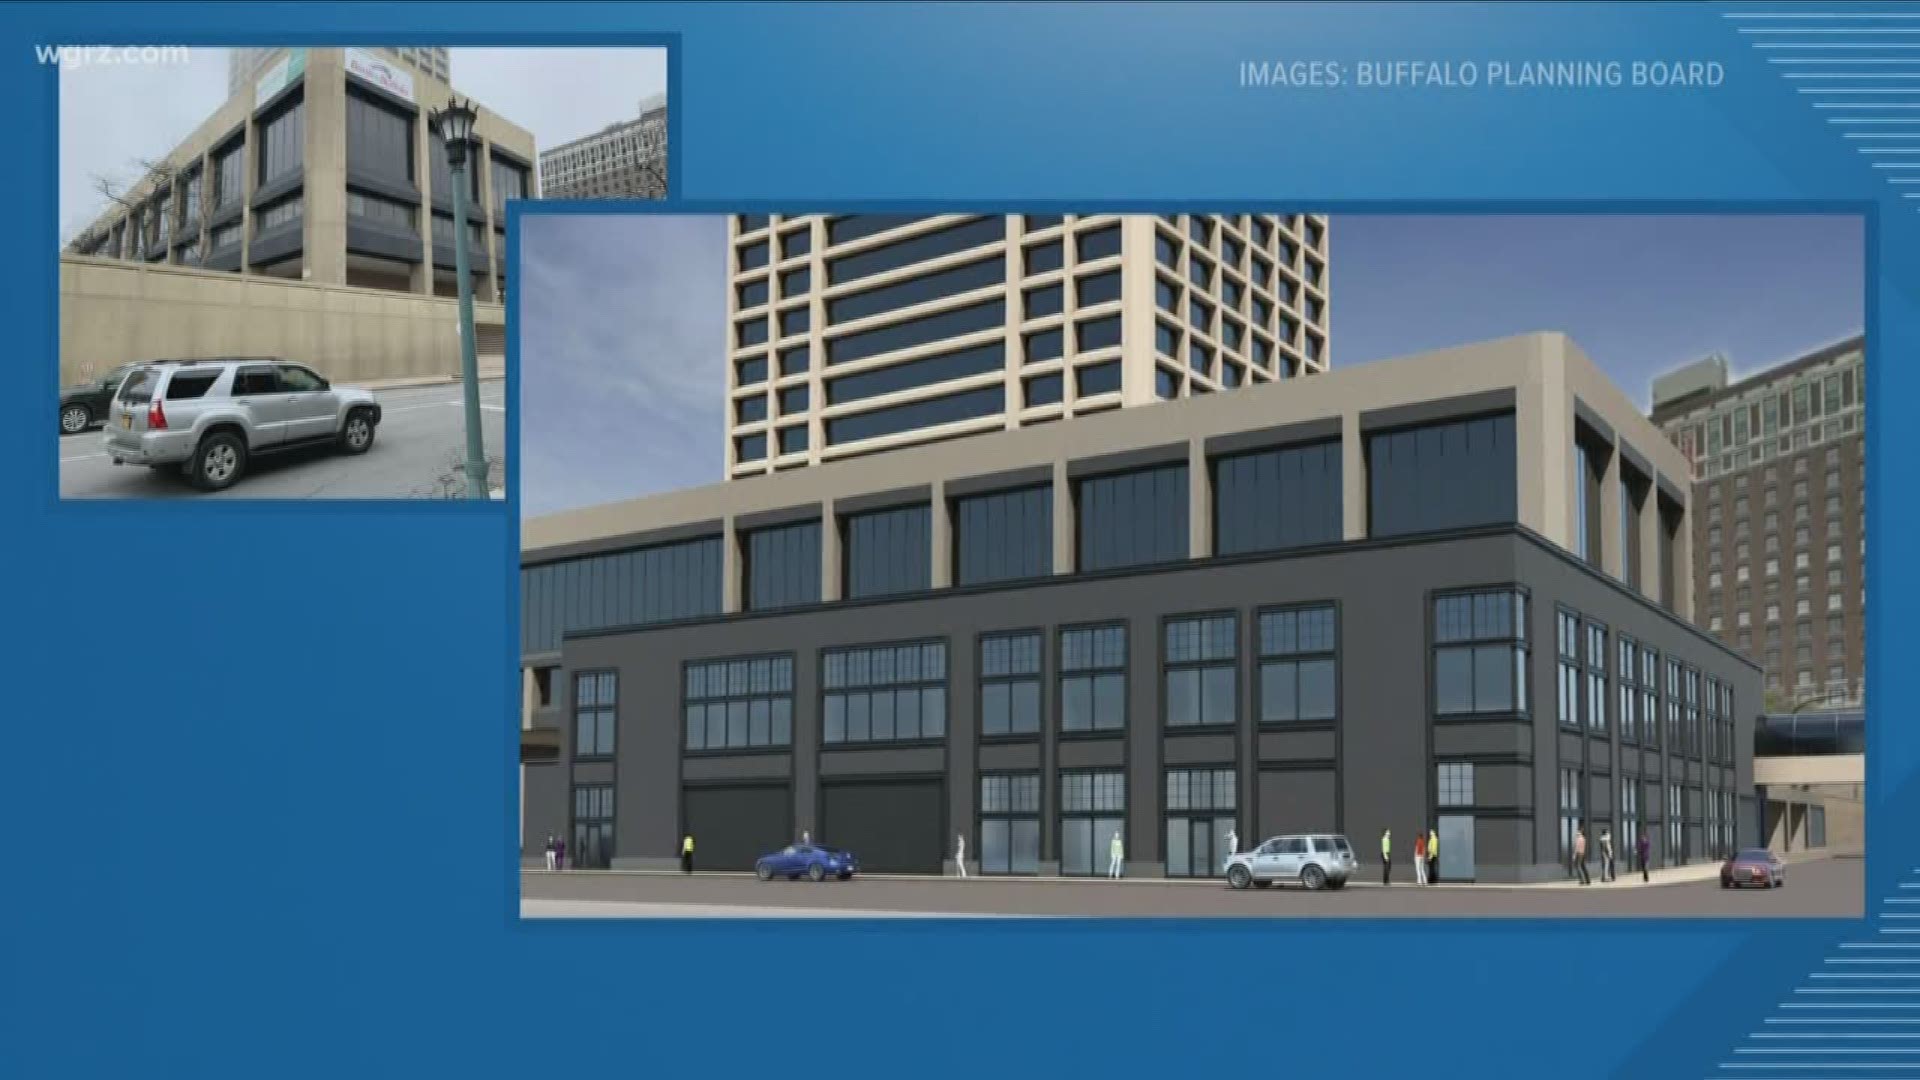 Douglas development corporation wants the city's approval to add more space around the base of the building. The Buffalo News reports it's a one-million dollar addition.